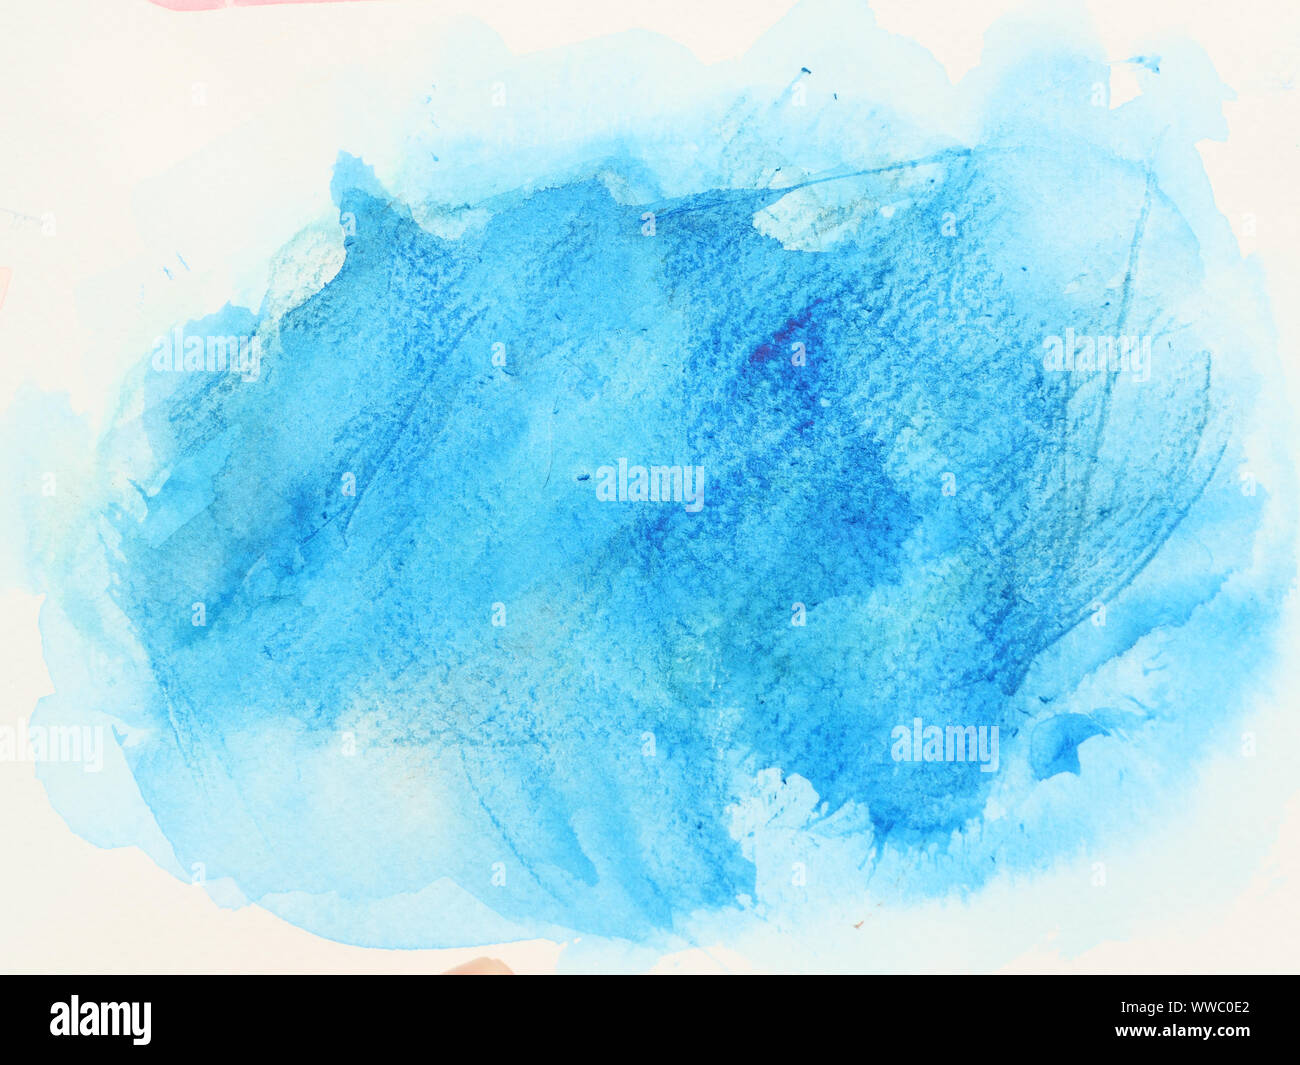 Abstract background and texture pattern blue and green color, Illustration watercolor hand draw and painted on paper Stock Photo